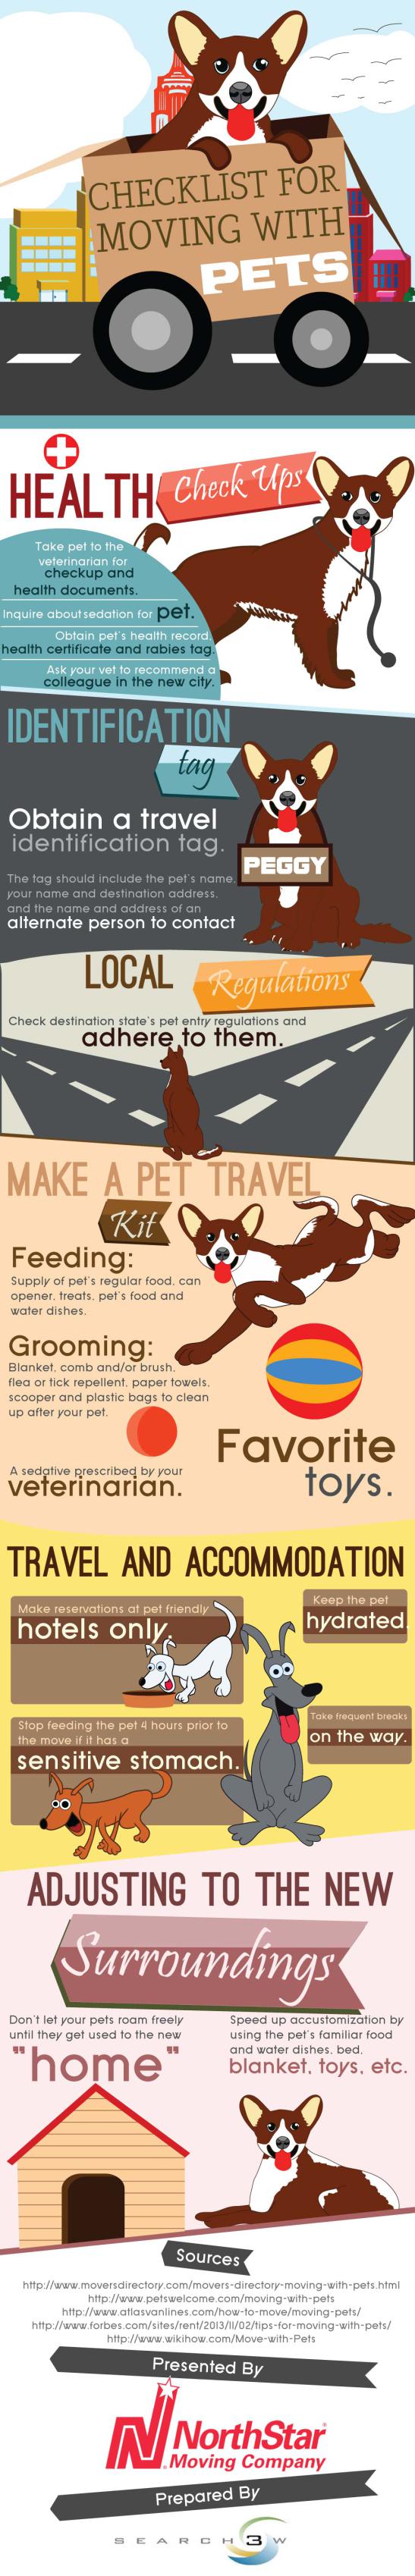 Checklist for Moving with Pets